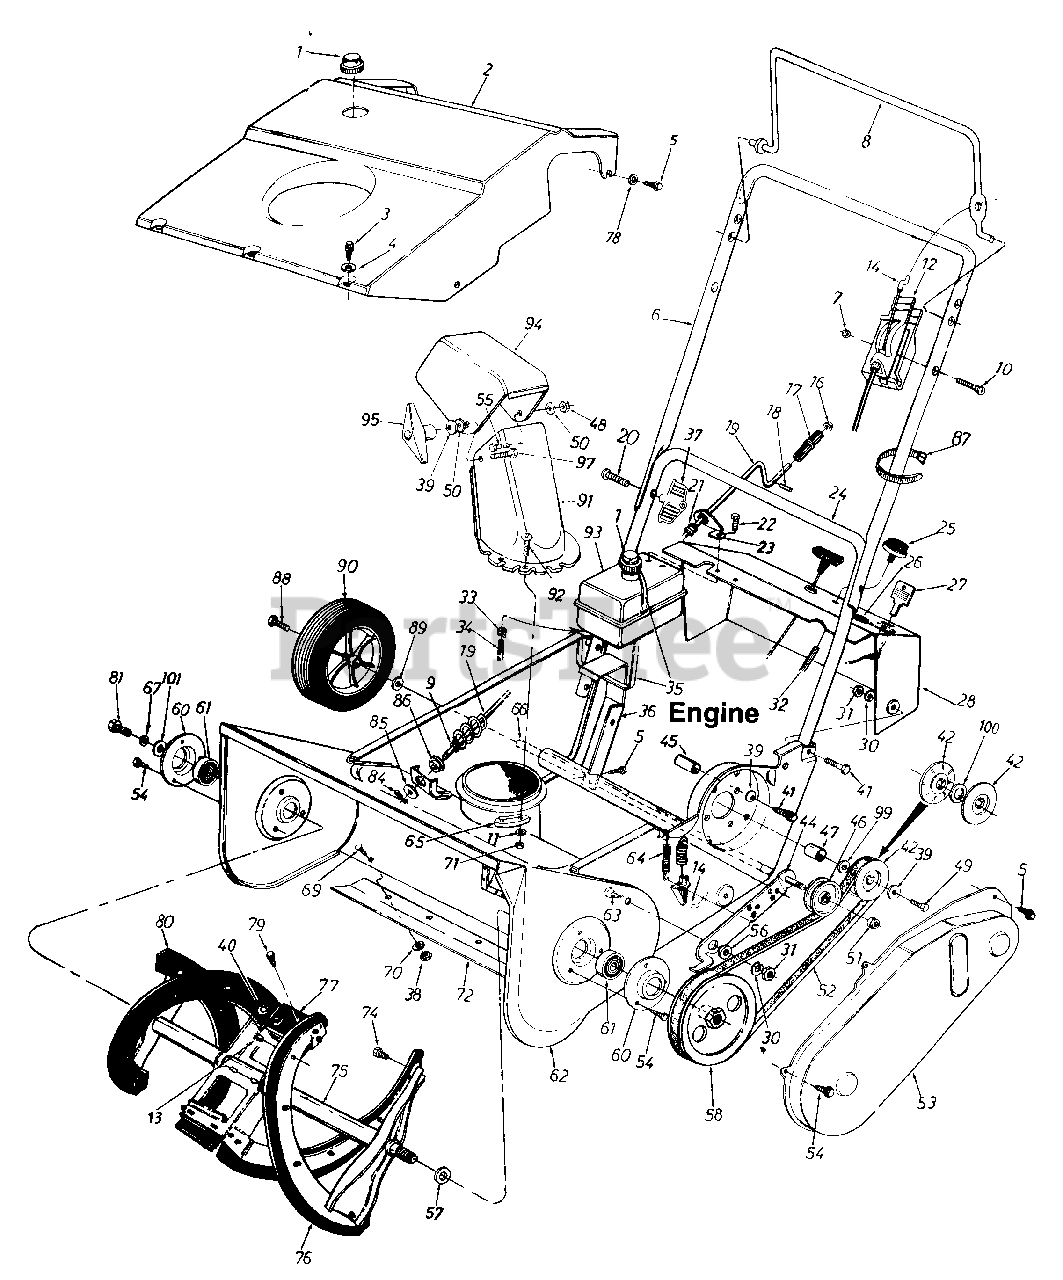 MTD 314-180-000 - MTD Snow Thrower (1994) General Assembly Parts Lookup